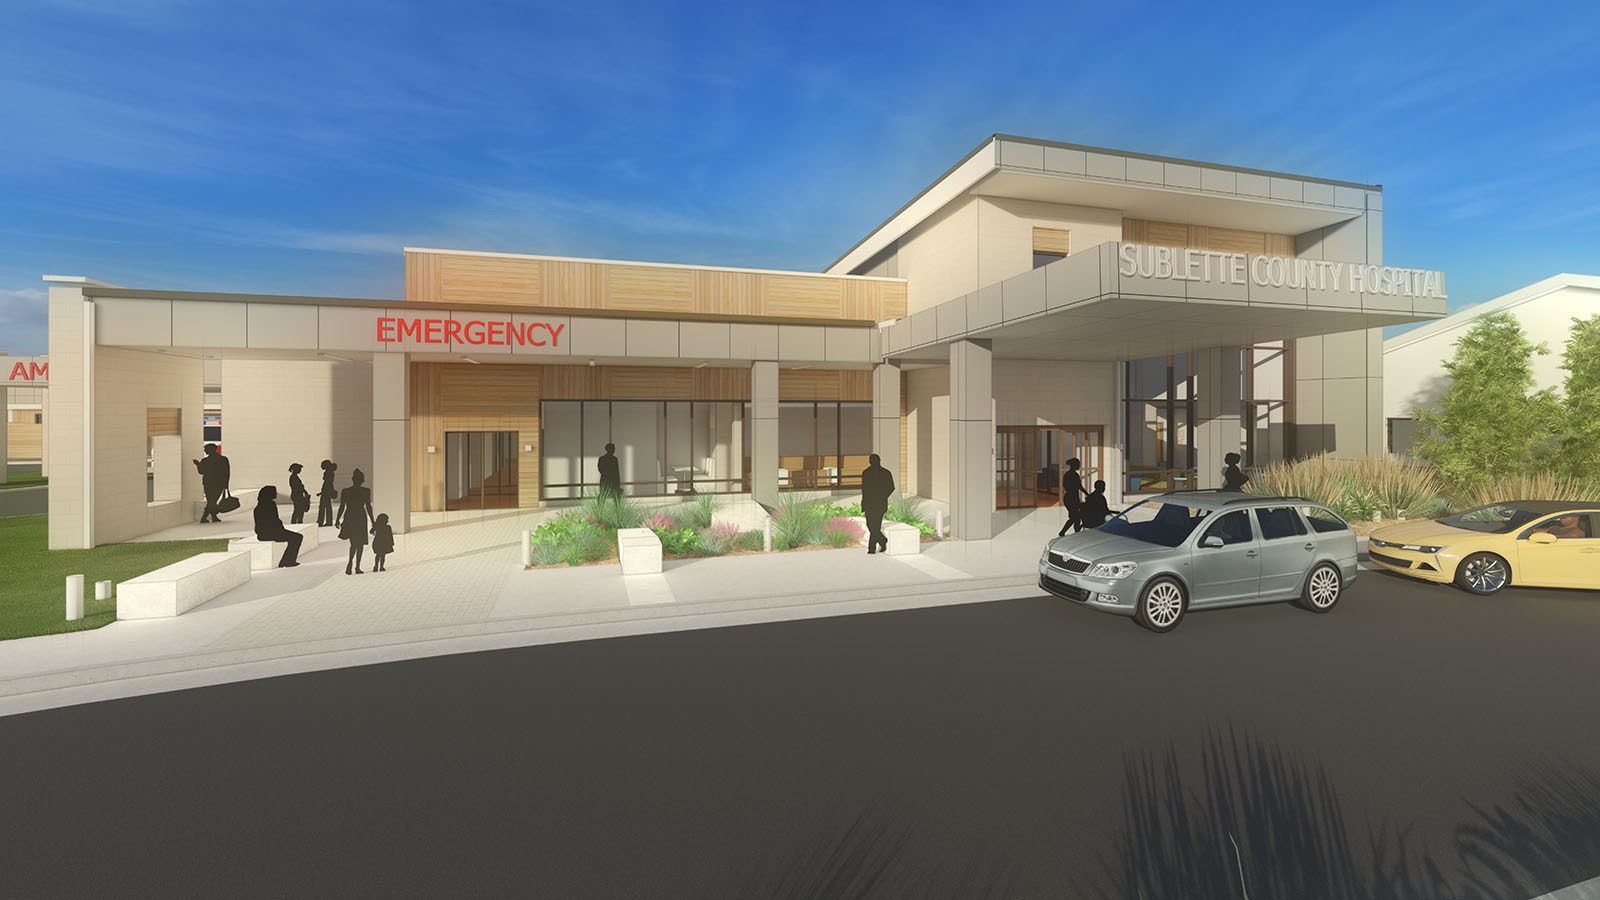 This rendering shows the front entrance to Sublette County Health, a new hospital being built in Pinedale.